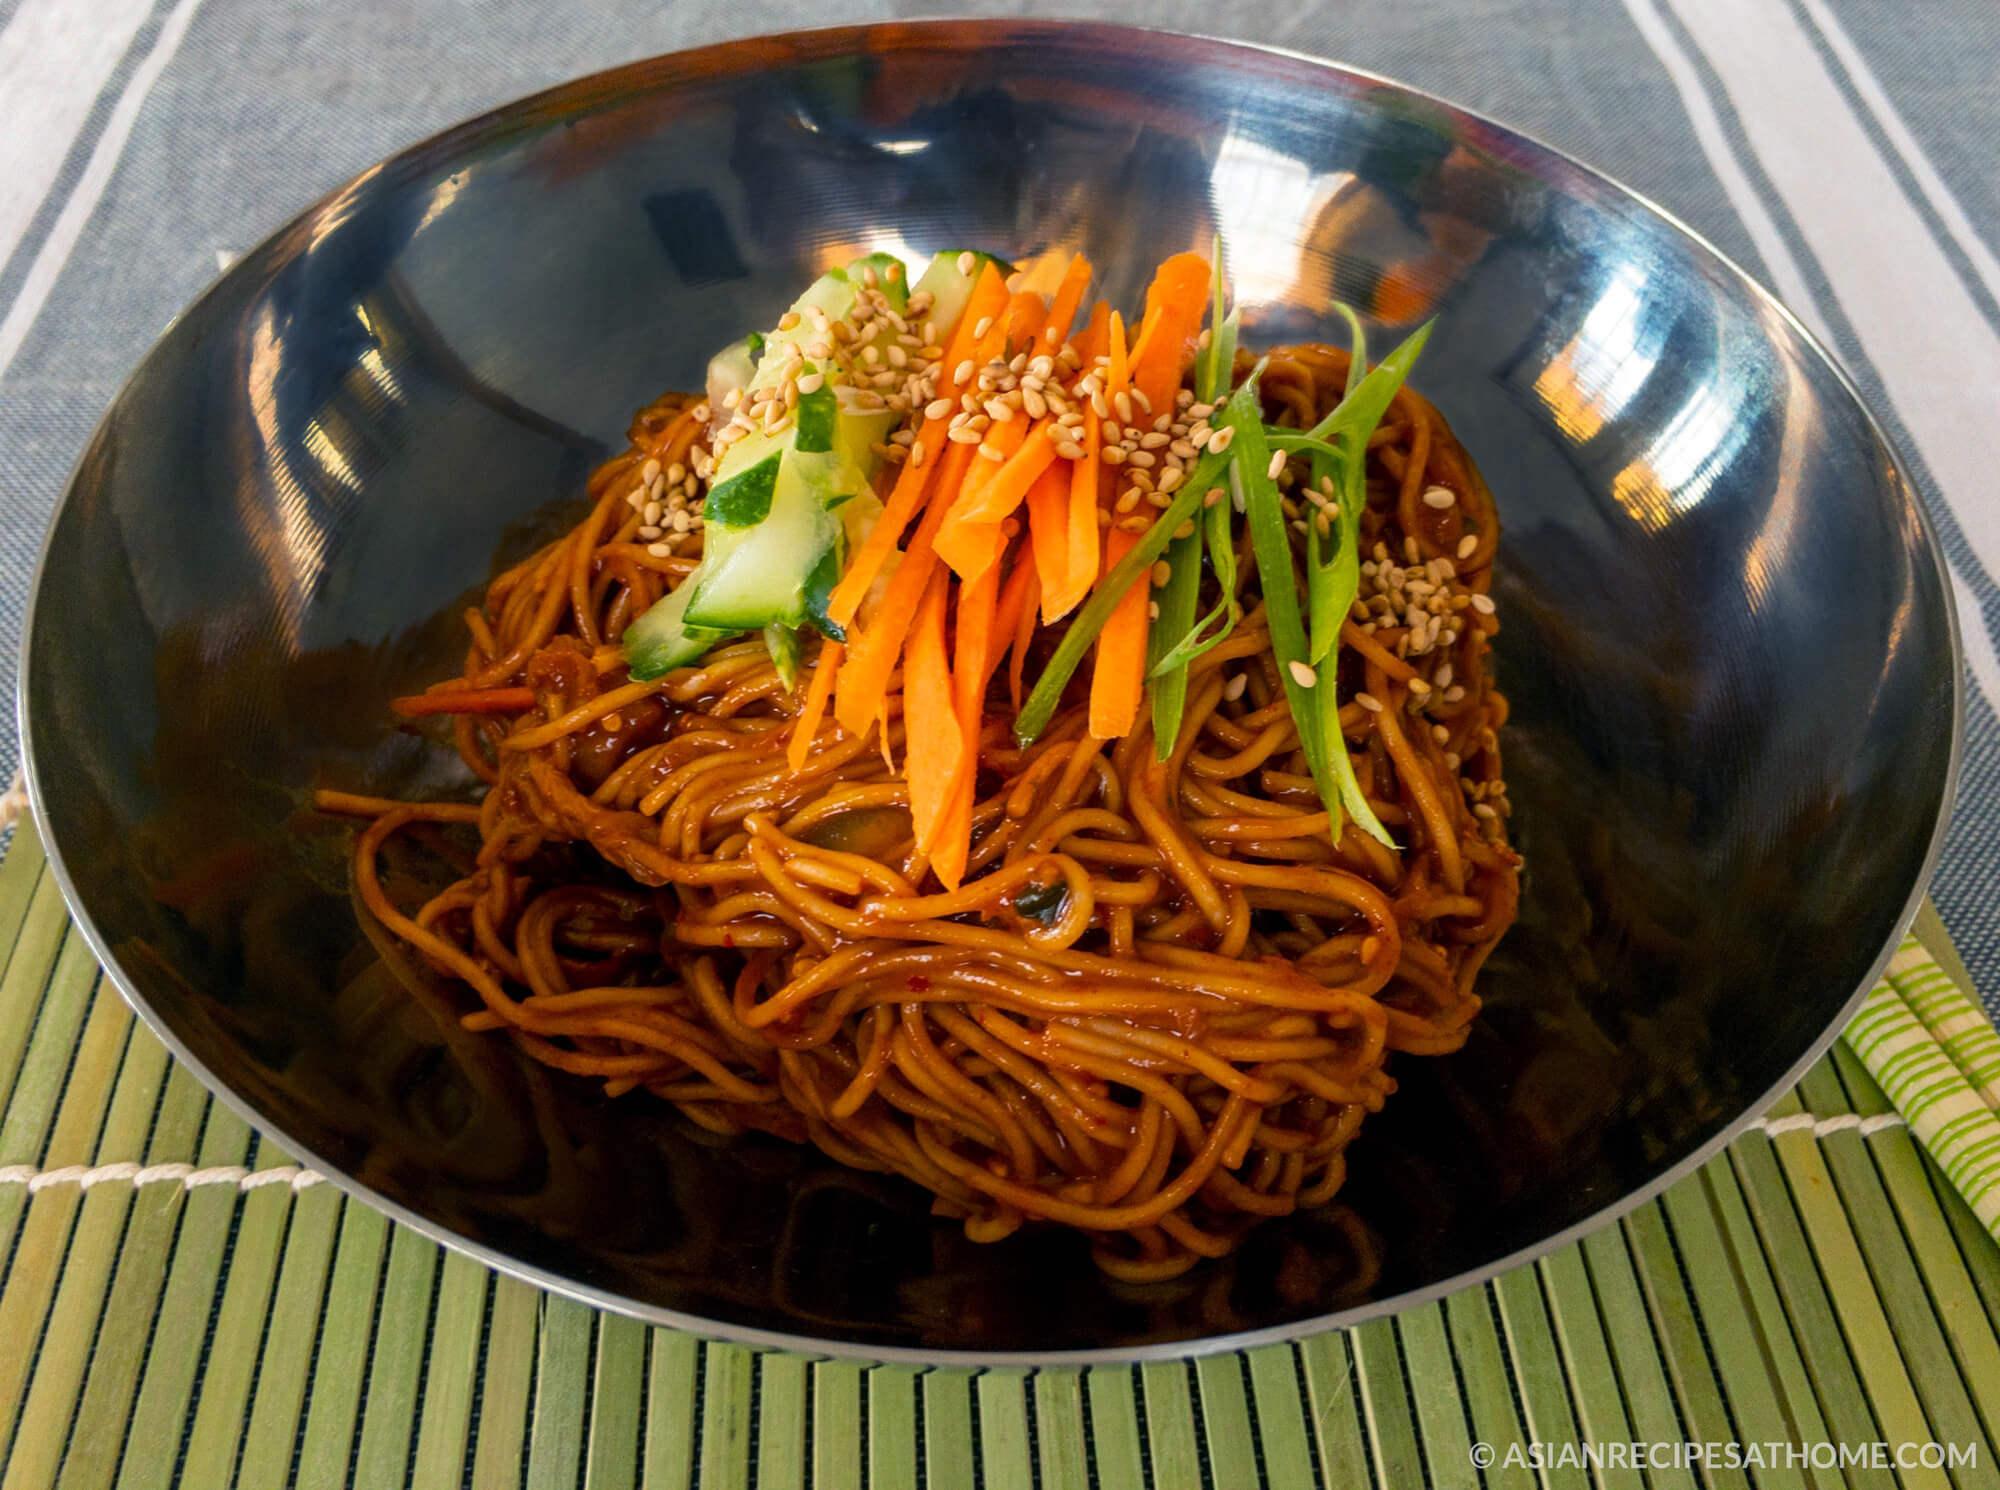 This cold, light and refreshing Korean noodle bowl recipe is easy to make, healthy and has a spicy kick from the sweet and sour gochujang sauce.